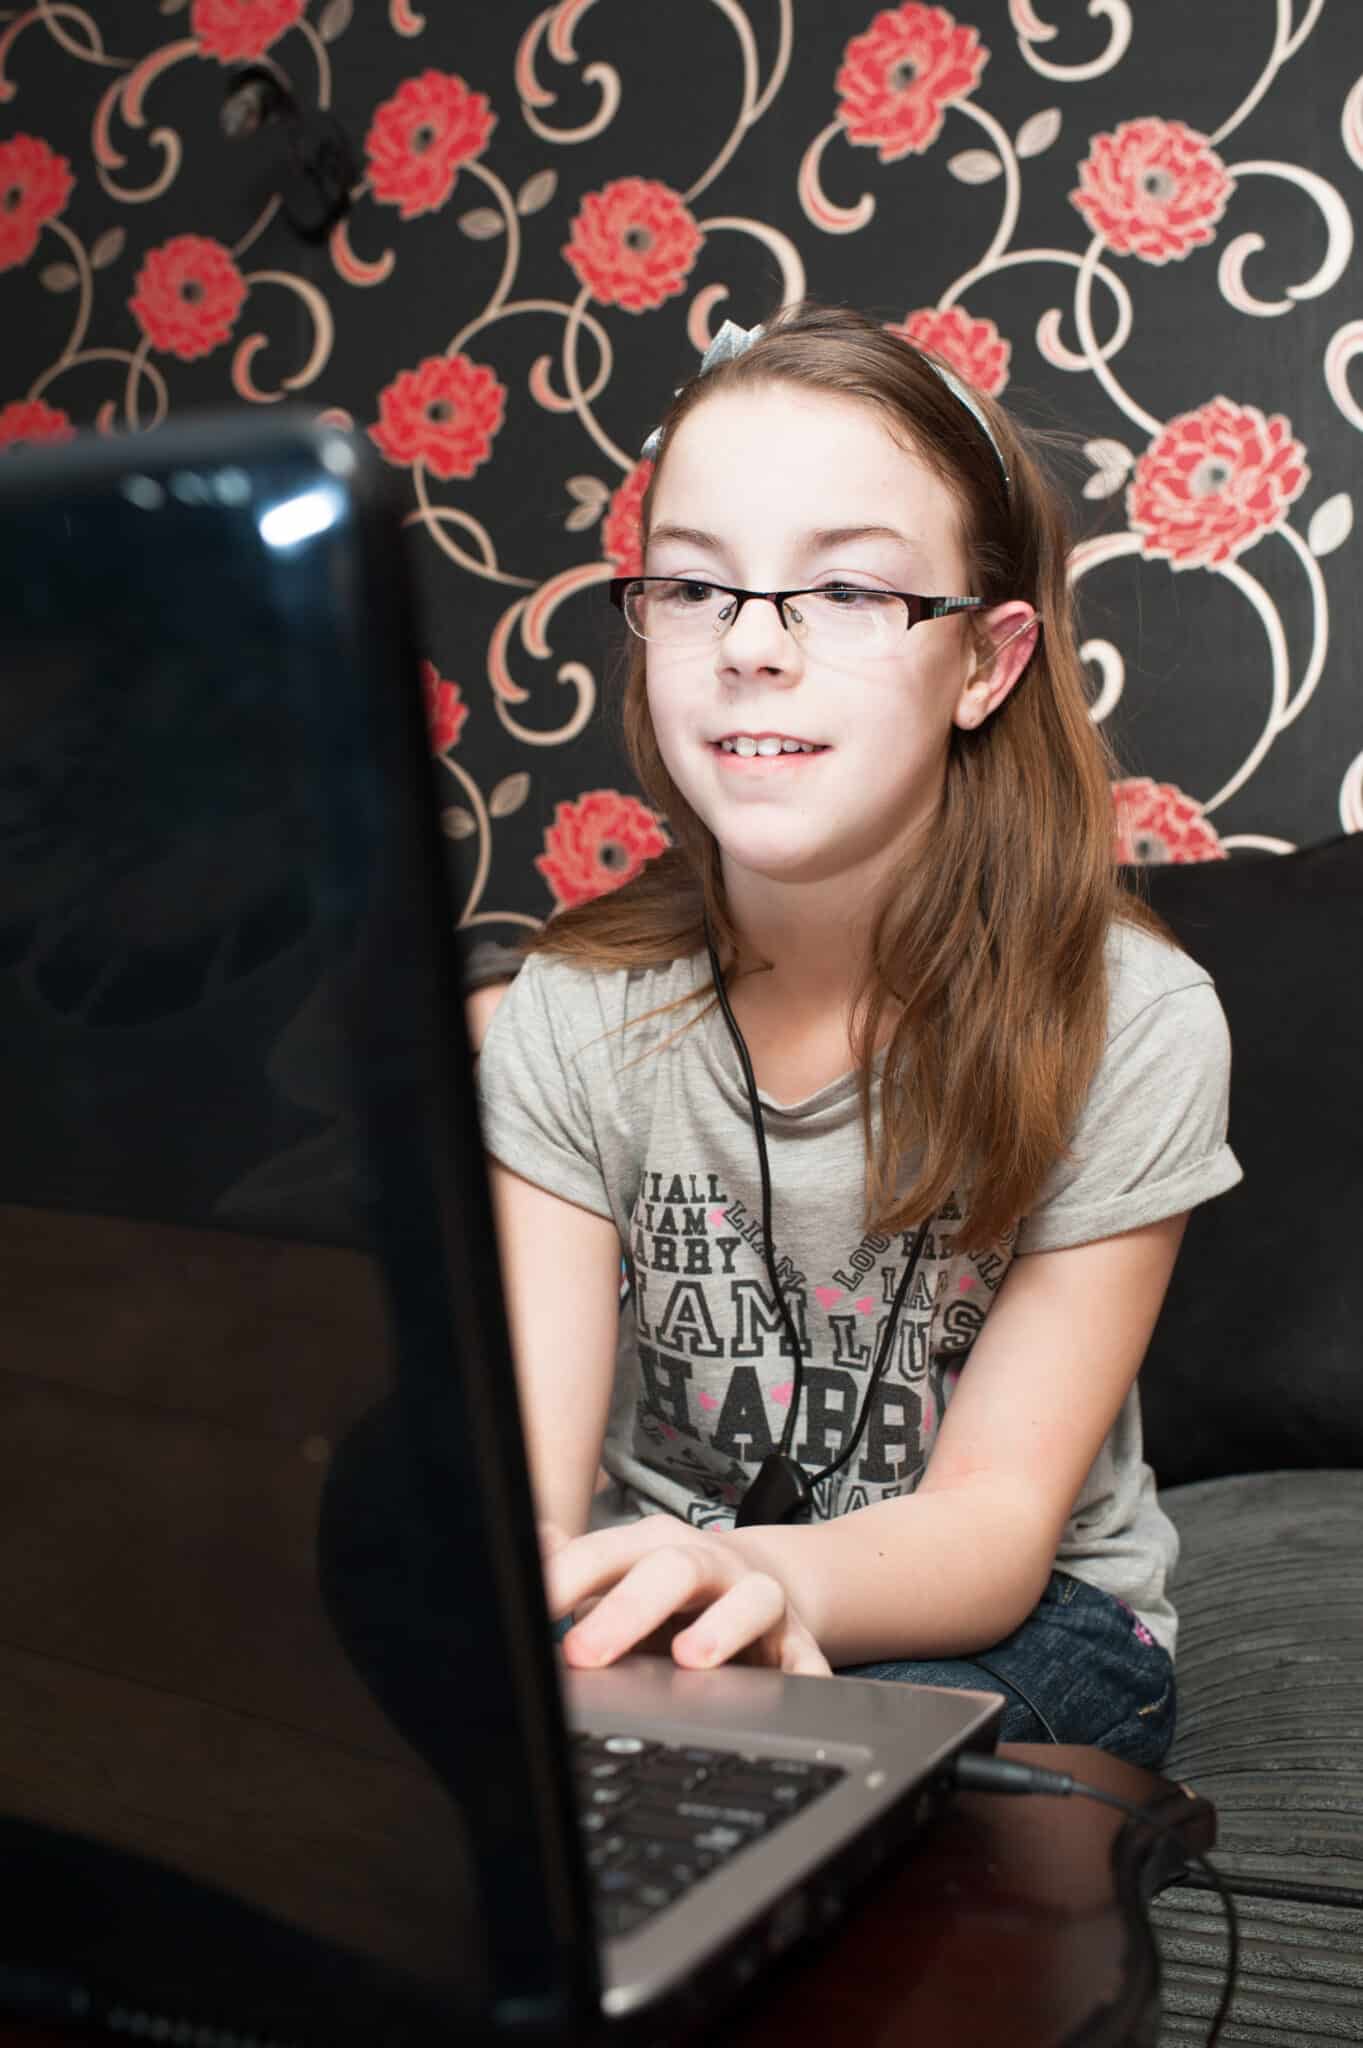 A girl with a hearing aid typing on a computer against a floral-print black wall